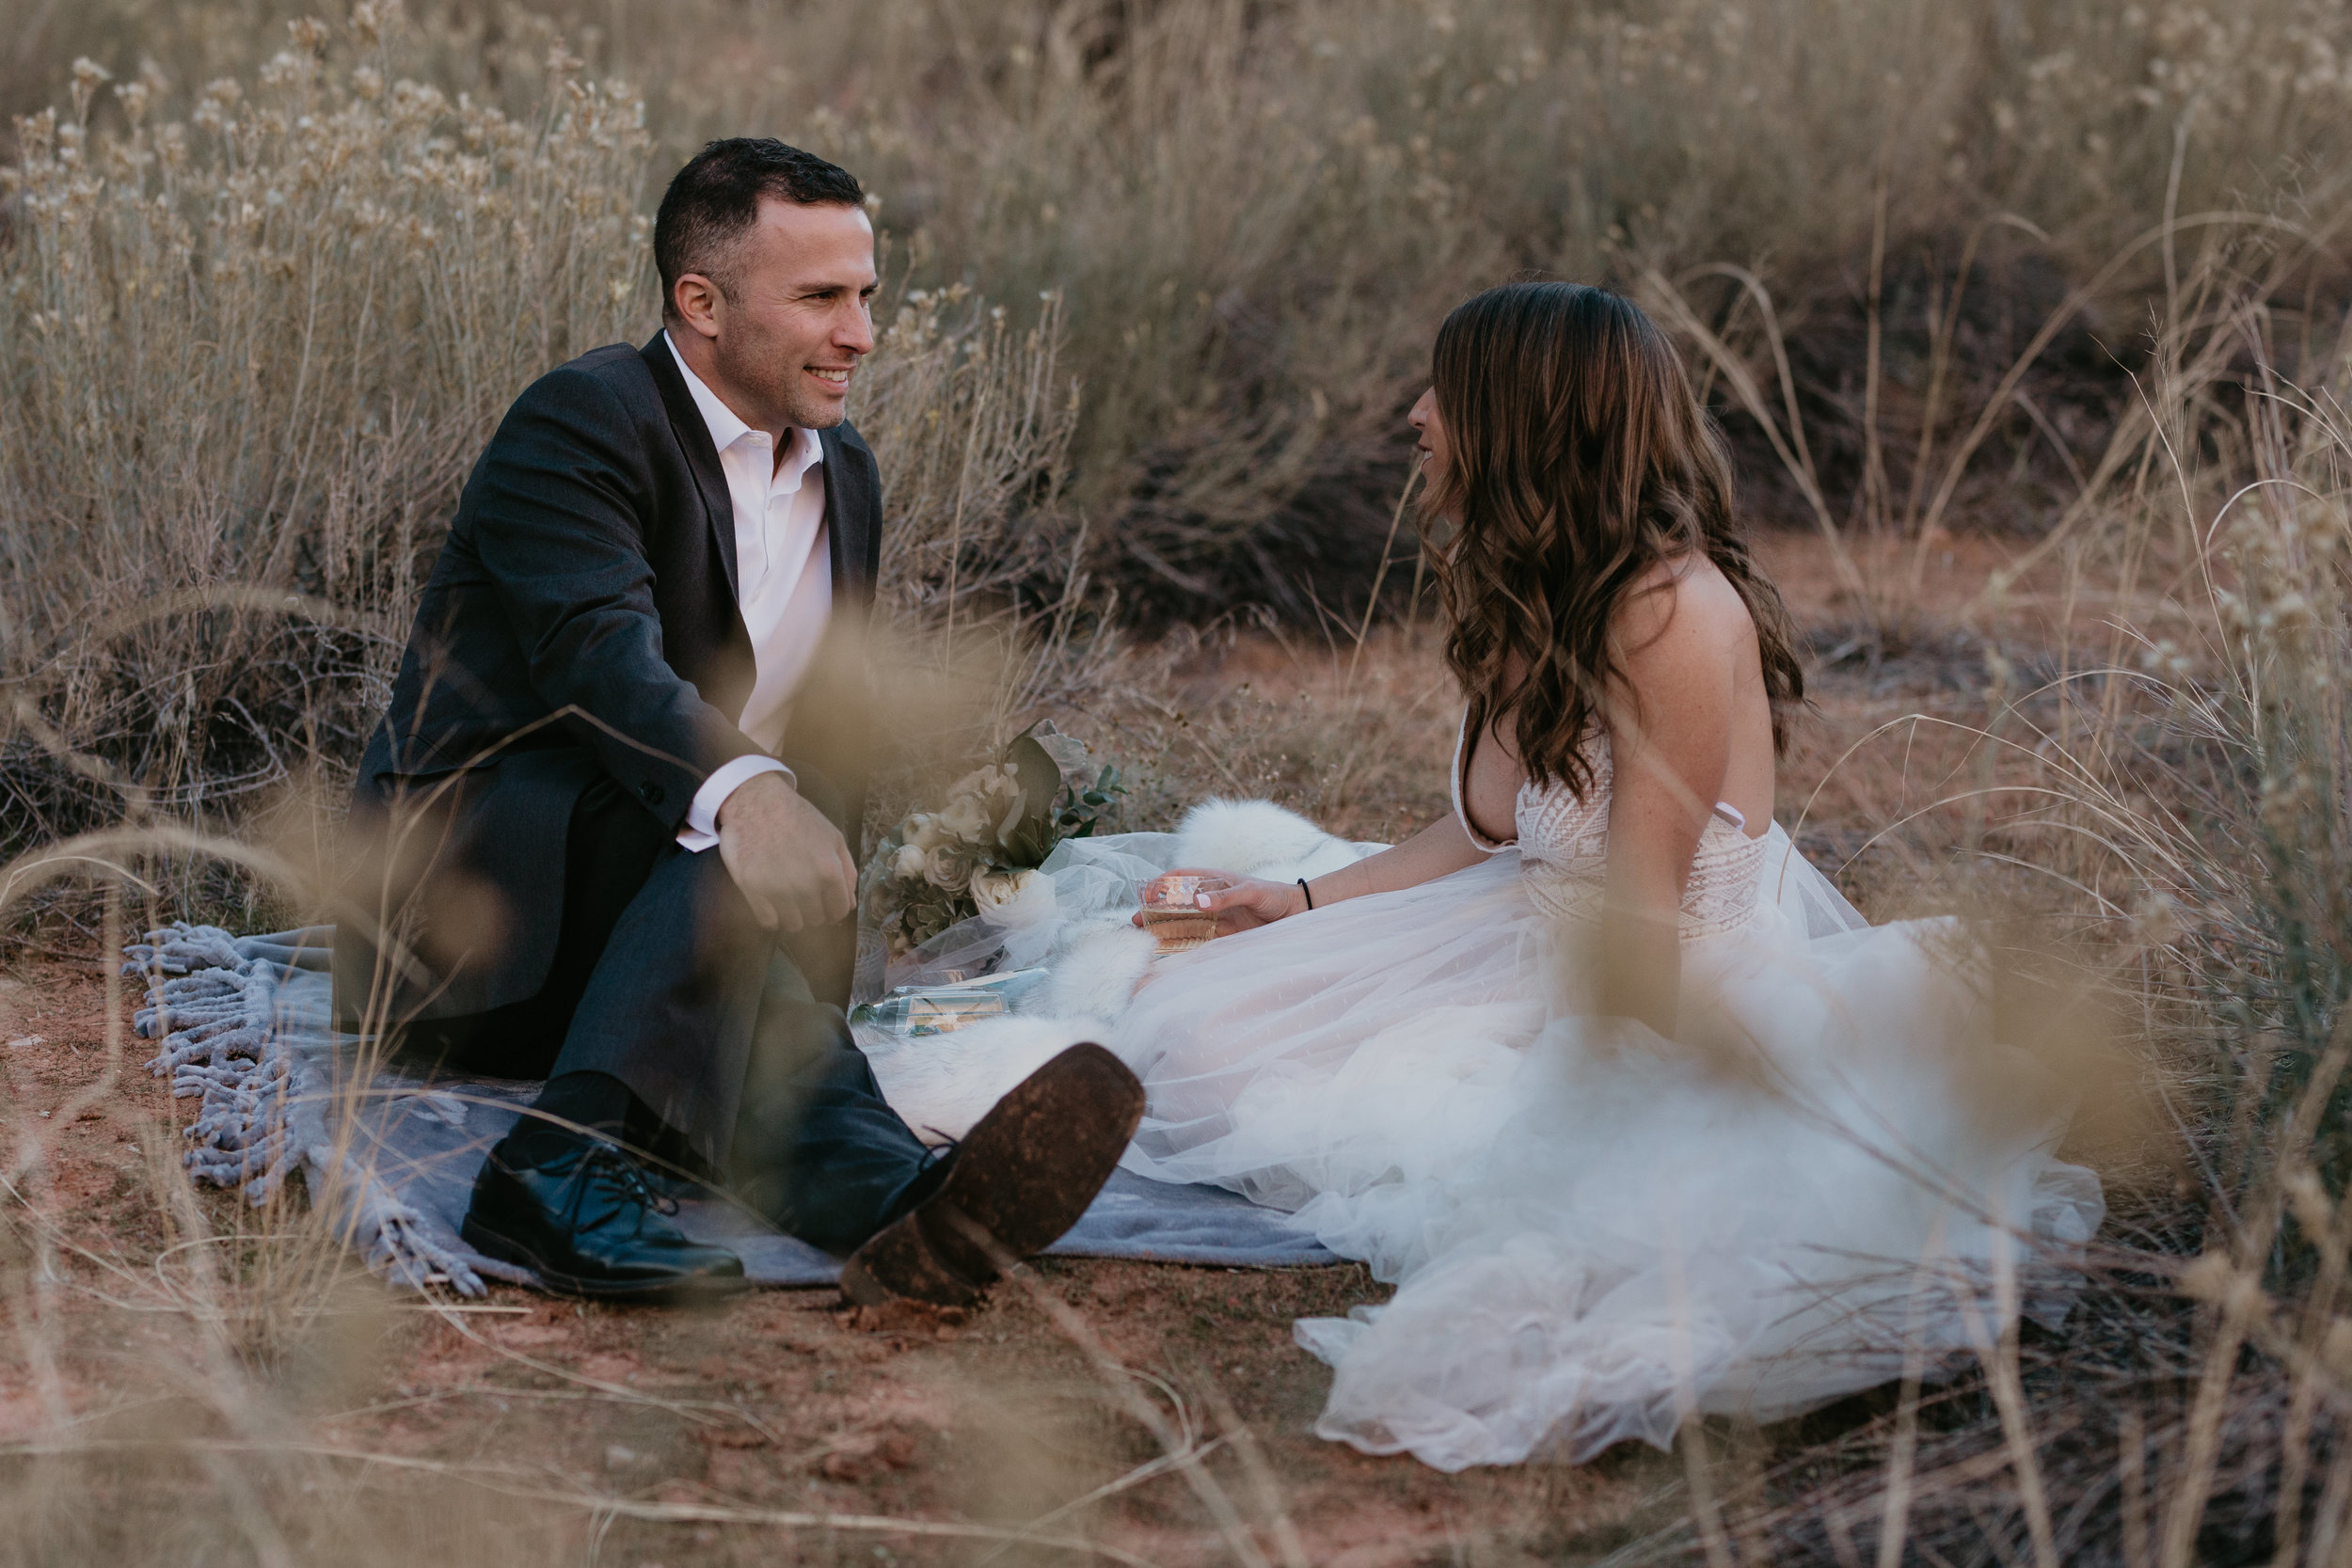 nicole-daacke-photography-zion-national-park-elopement-photographer-canyon-overlook-trail-elope-hiking-adventure-wedding-photos-fall-utah-red-rock-canyon-stgeorge-eloping-photographer-2.jpg